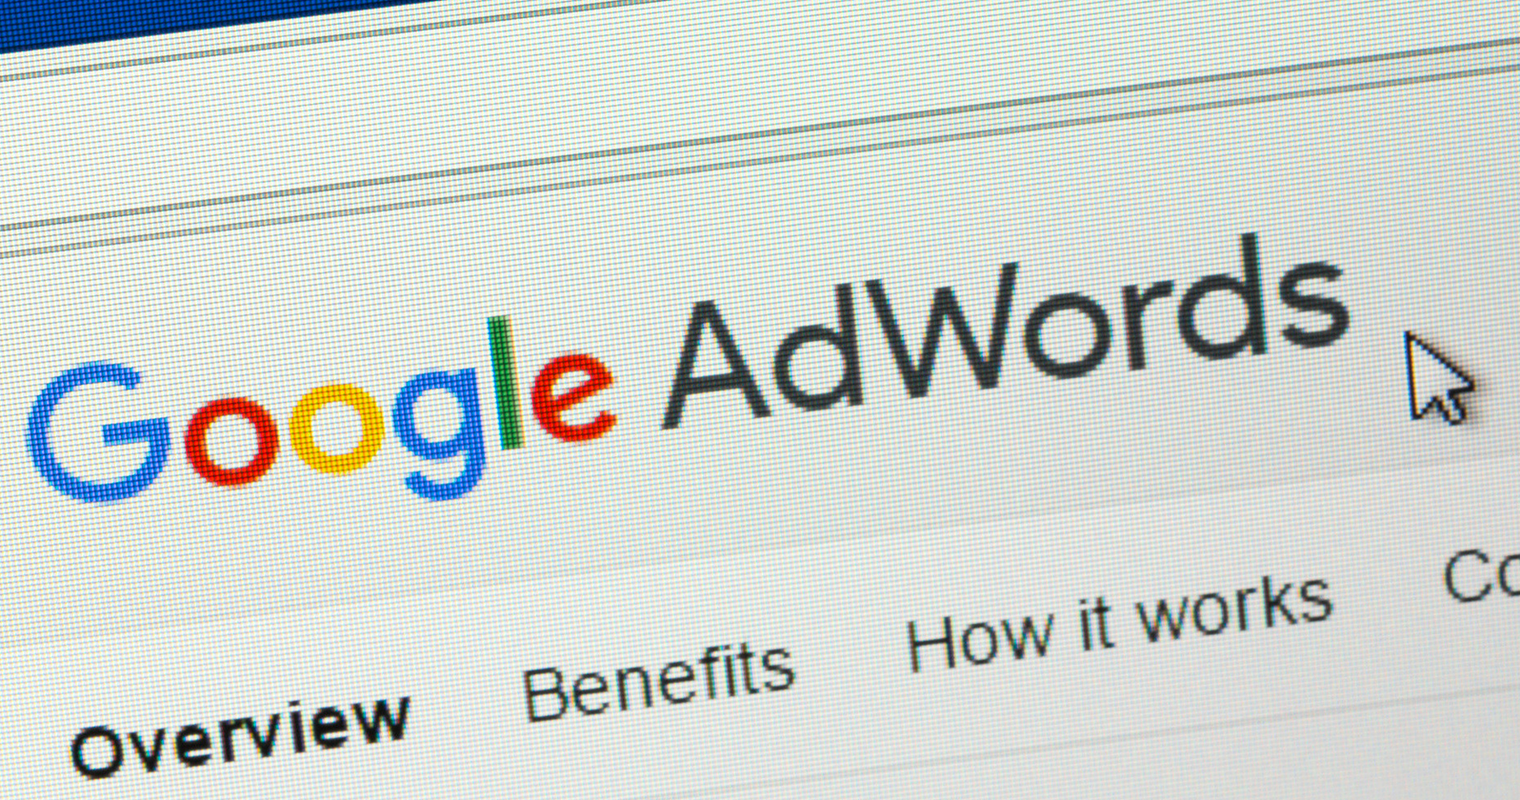 Google AdWords Introduces Account-Level Call Extensions, & More Click-to-Call Updates